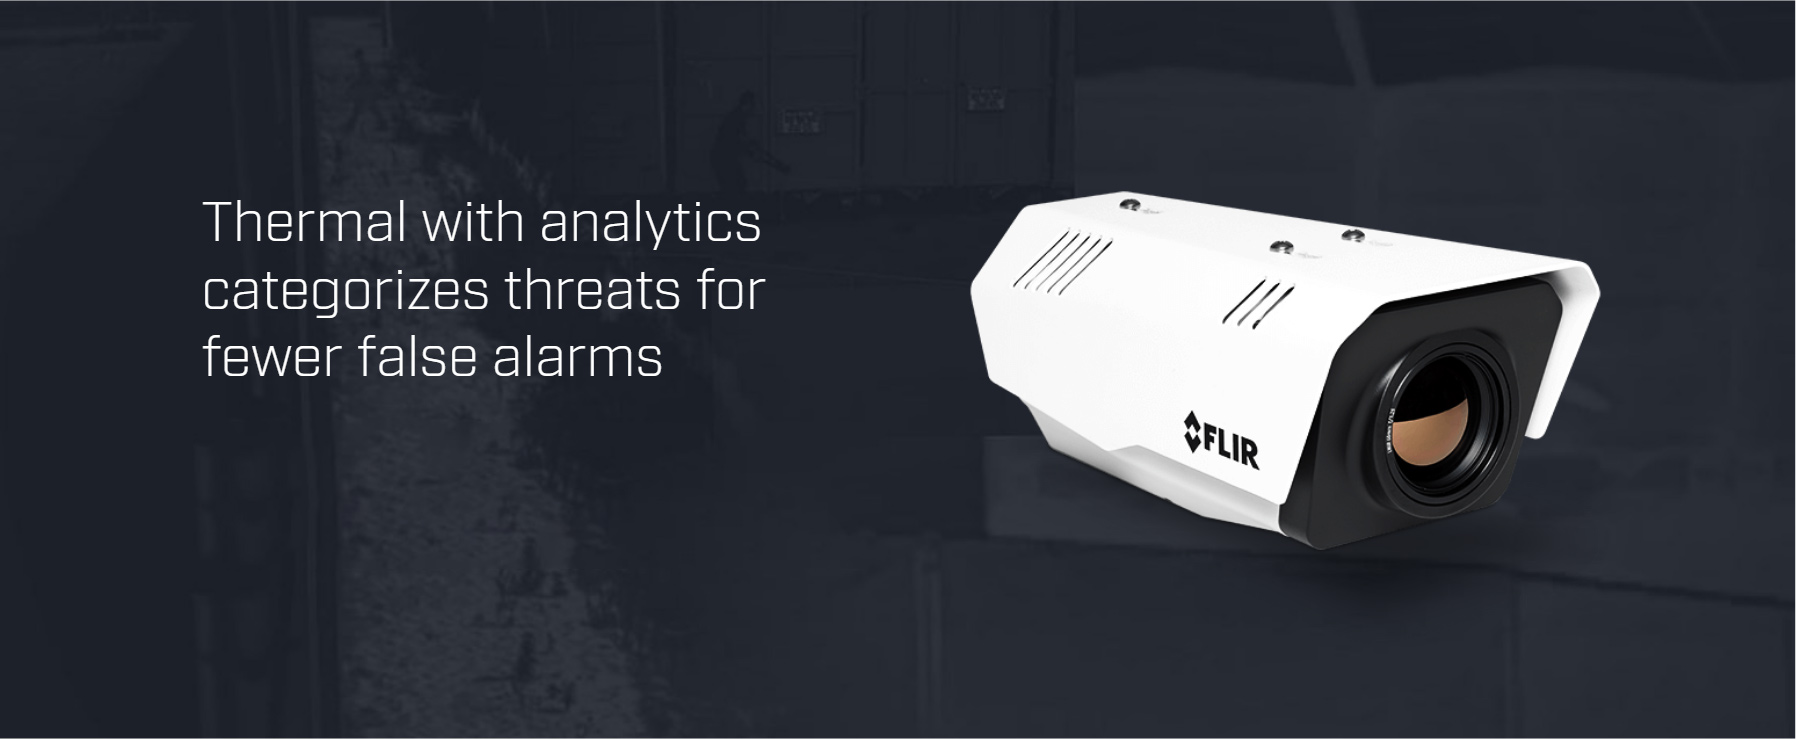 FLIR Elara FC 3xx ID-Series Thermal Imaging Security Cameras - Thermal with analytics categorizes threats for fewer false alarms.